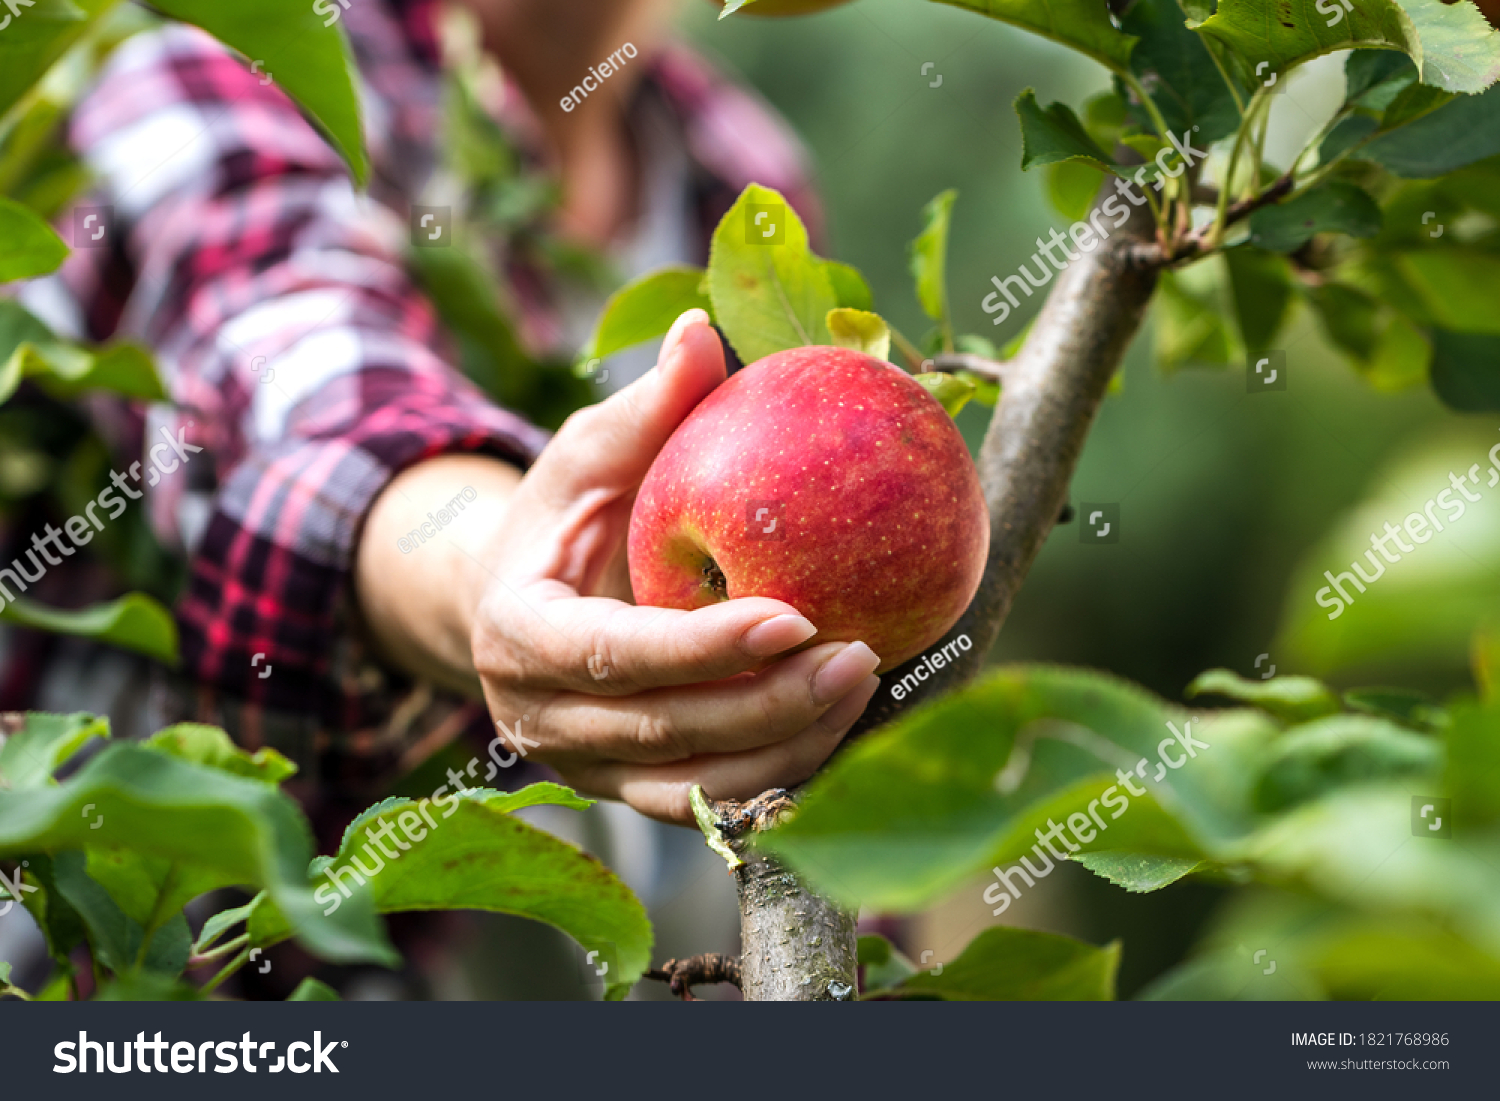 Farmer picking red apple from tree. Woman harvesting fruit from branch at autumn season #1821768986